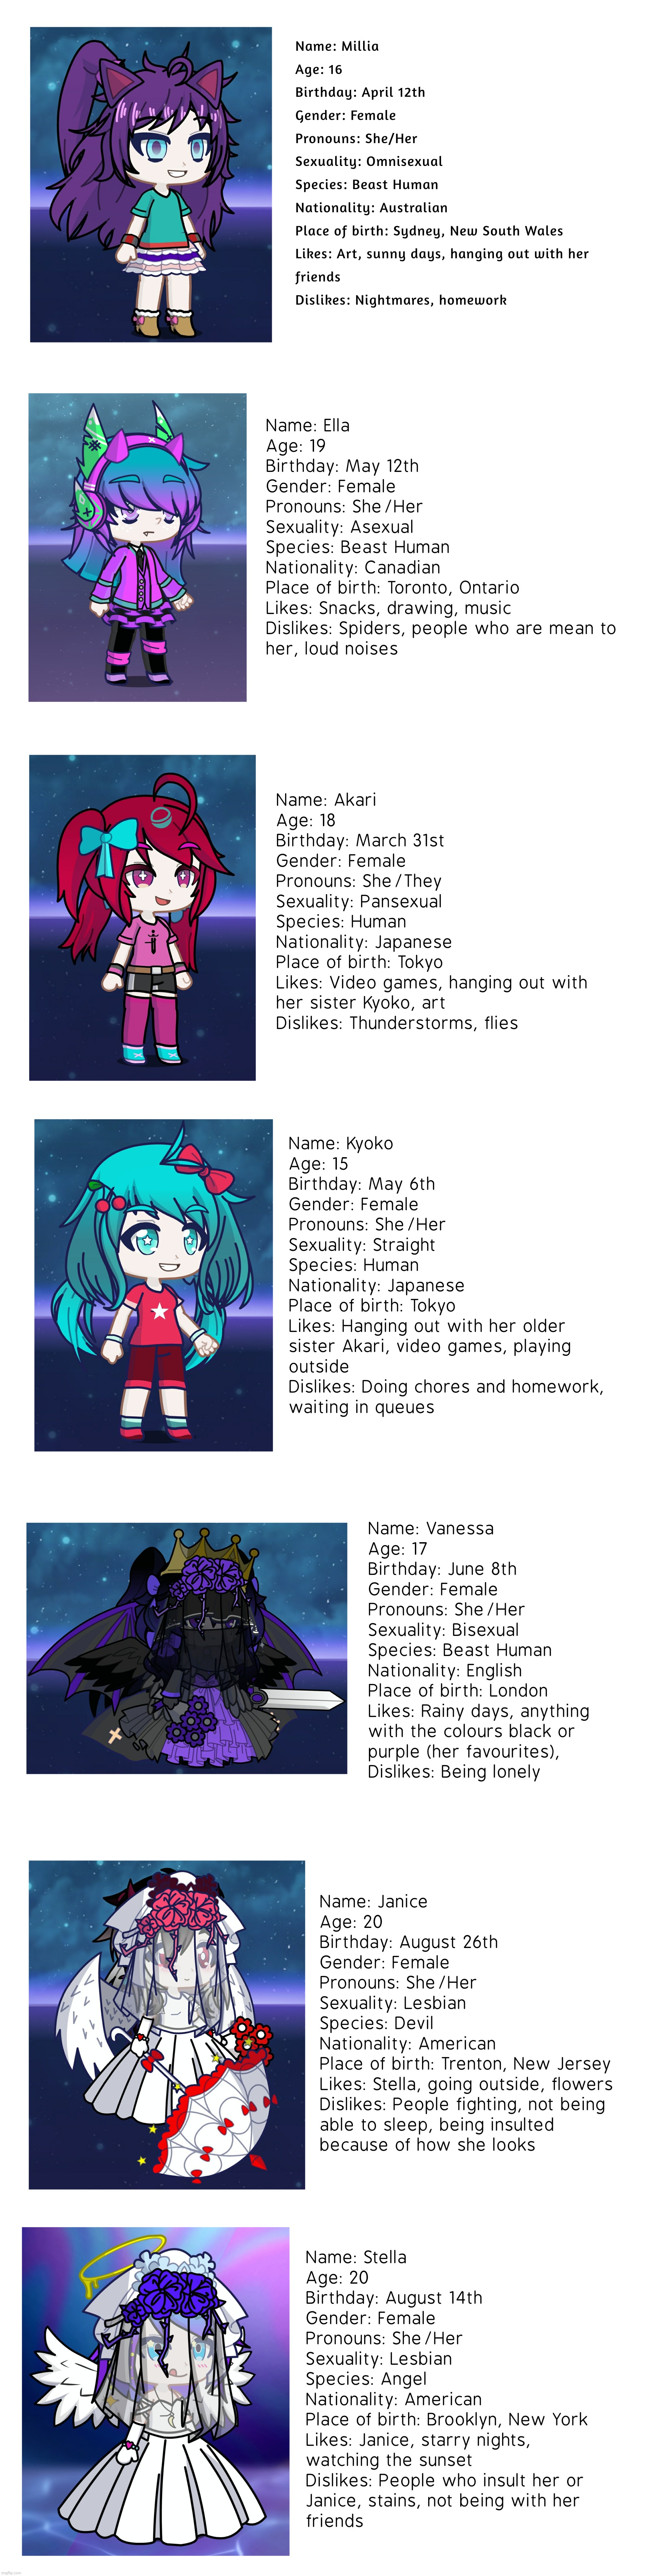 Thought I'd share some of my Gacha Life OCs! Feel free to use any of these as long as you credit me! | image tagged in gacha life,ocs,gacha | made w/ Imgflip meme maker